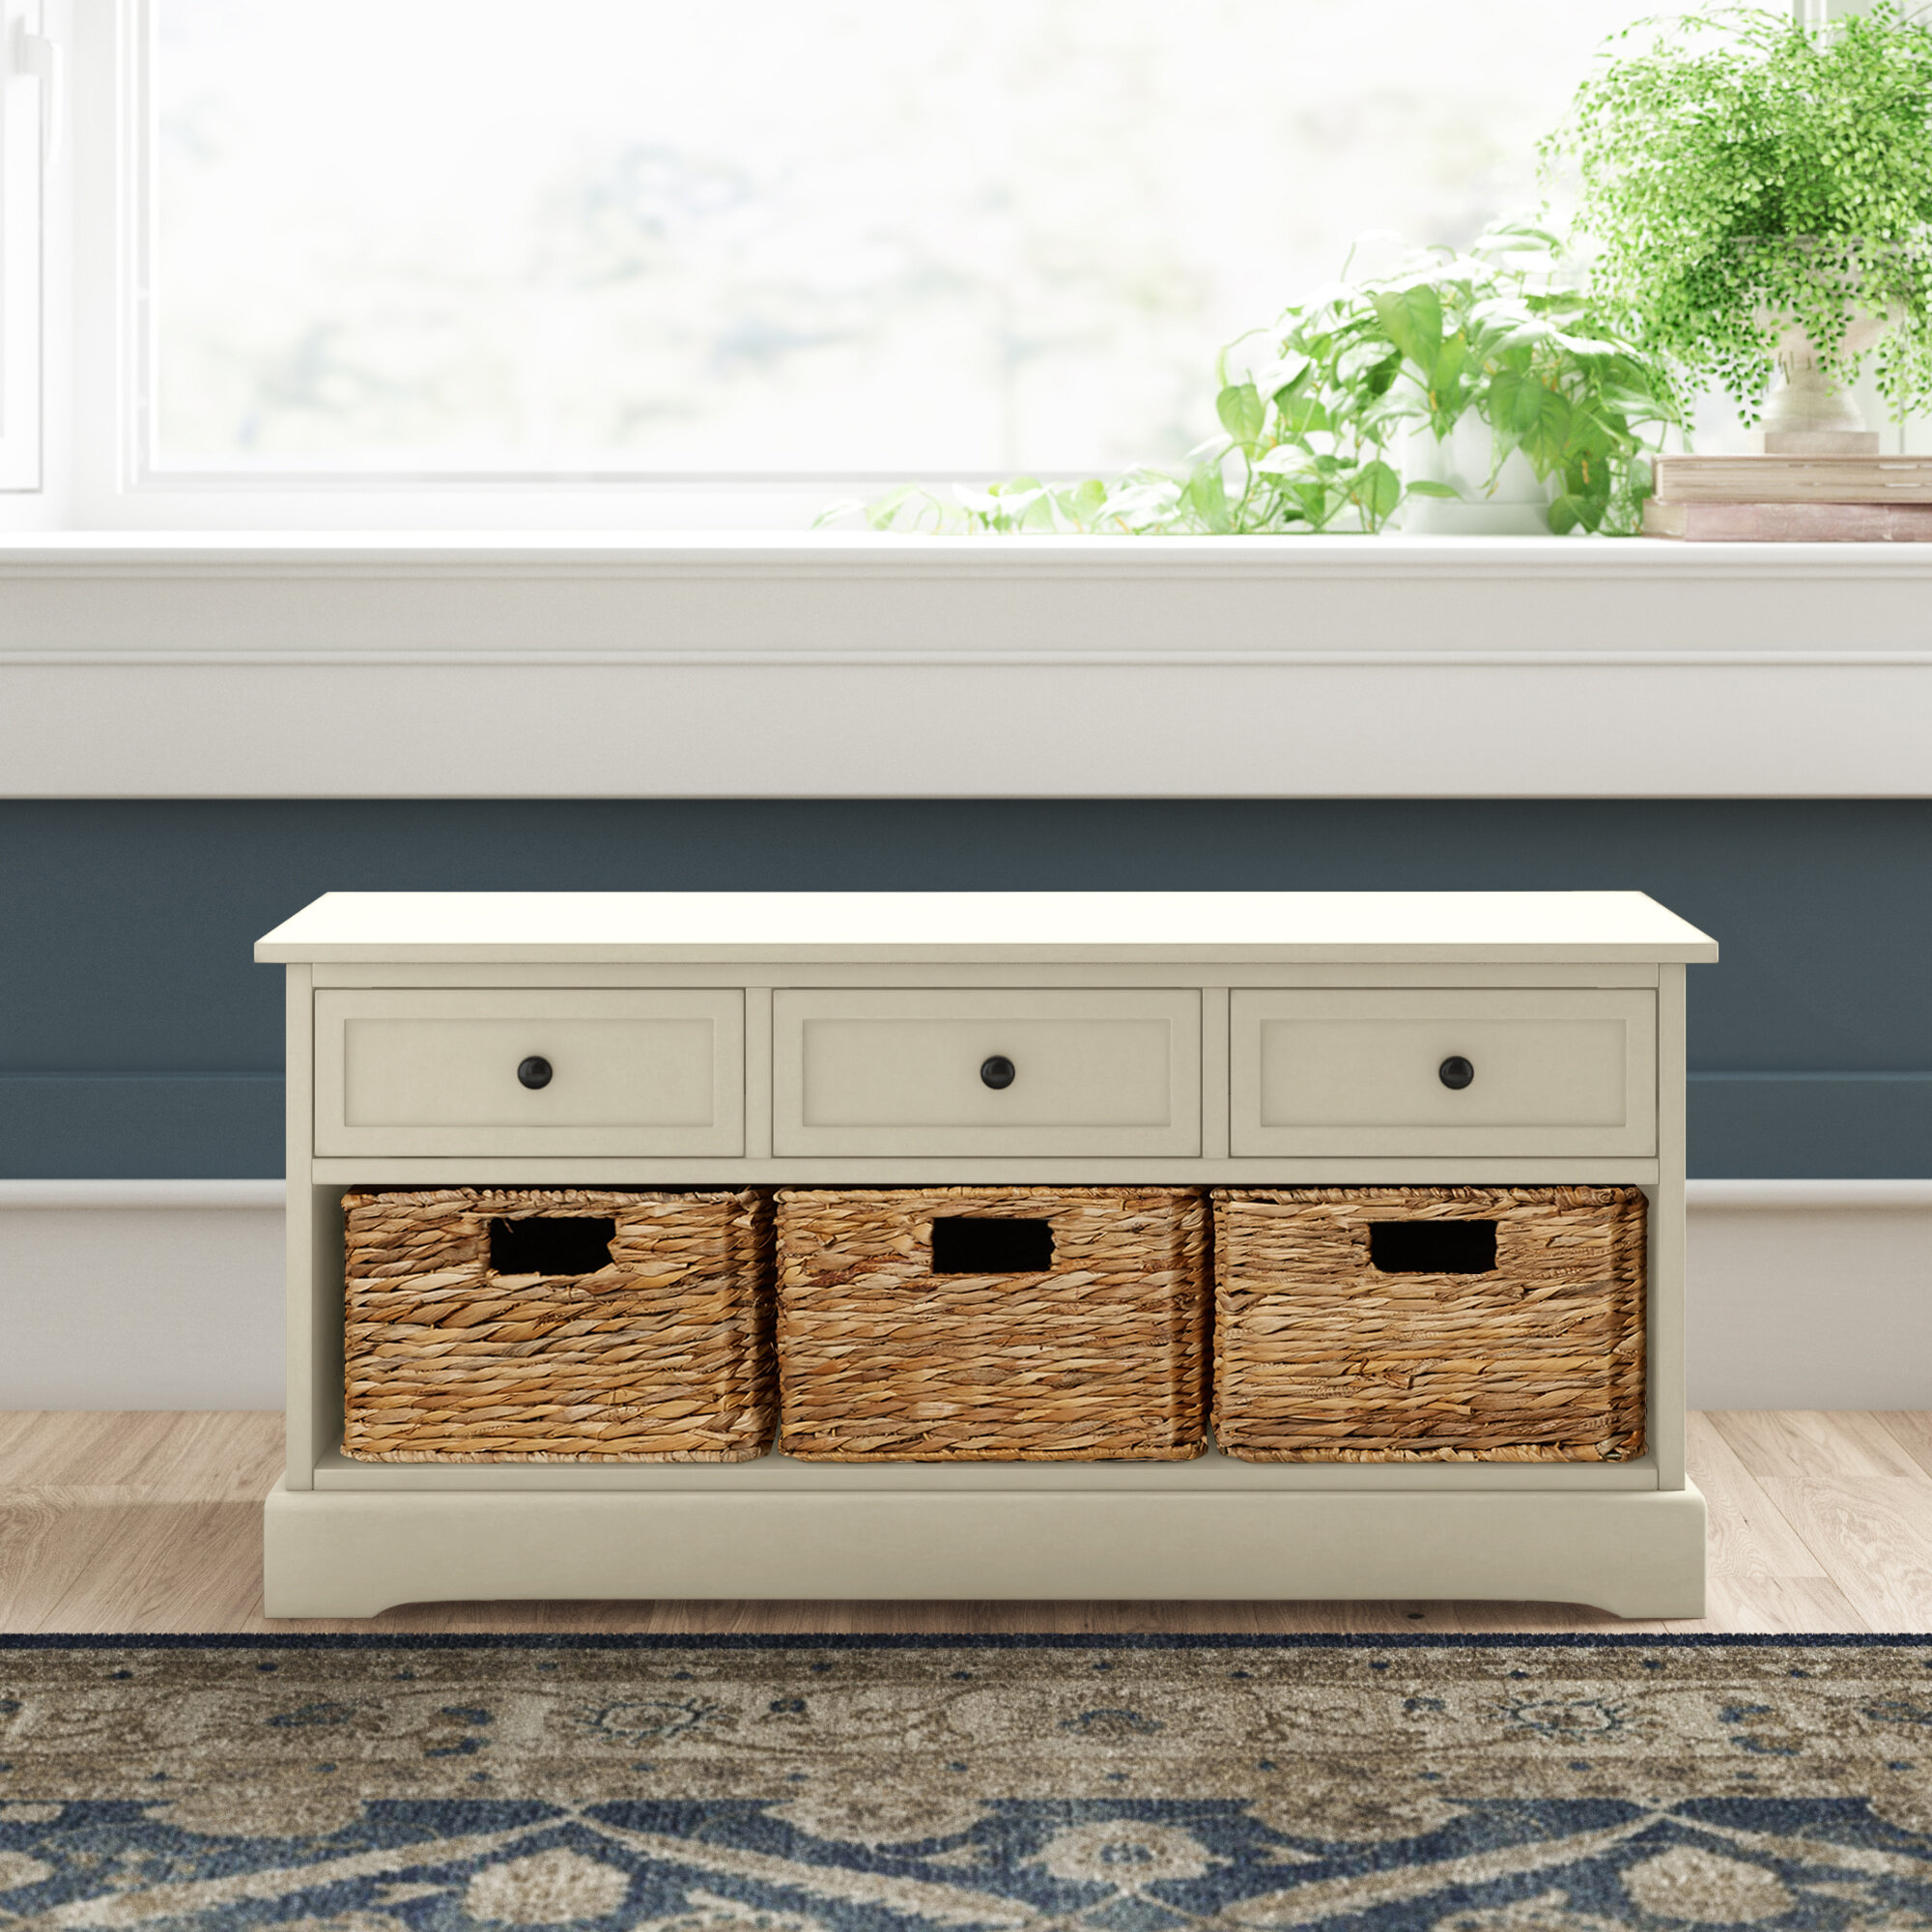 Alvina Solid Wood Bench With Drawers Reviews Birch Lane